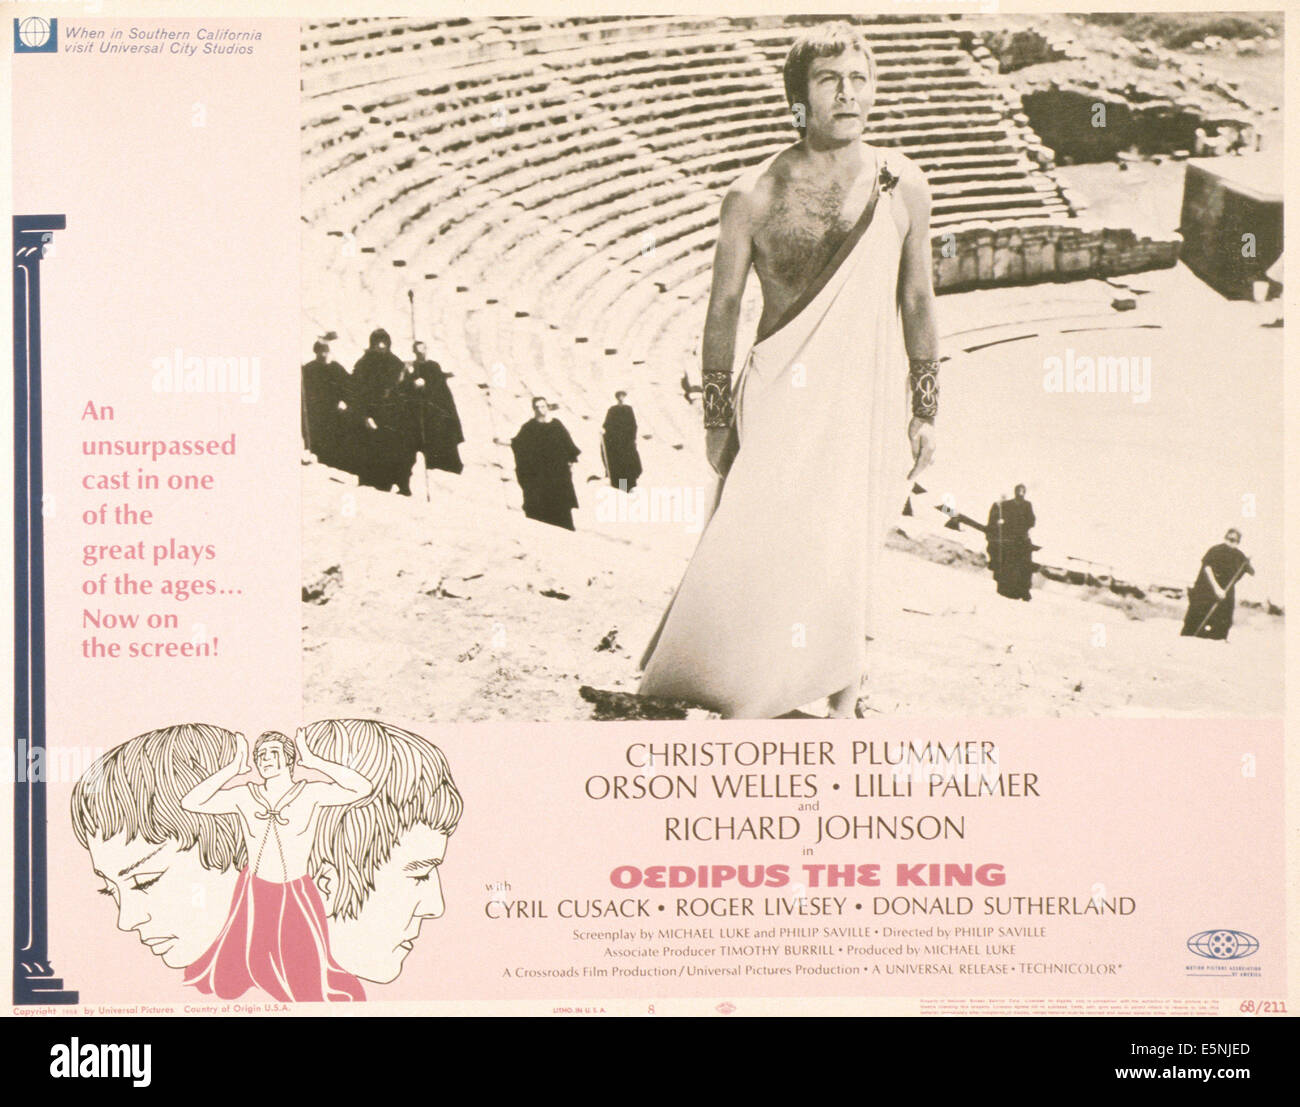 OEDIPUS THE KING, US poster, Christopher Plummer, 1968 Stock Photo